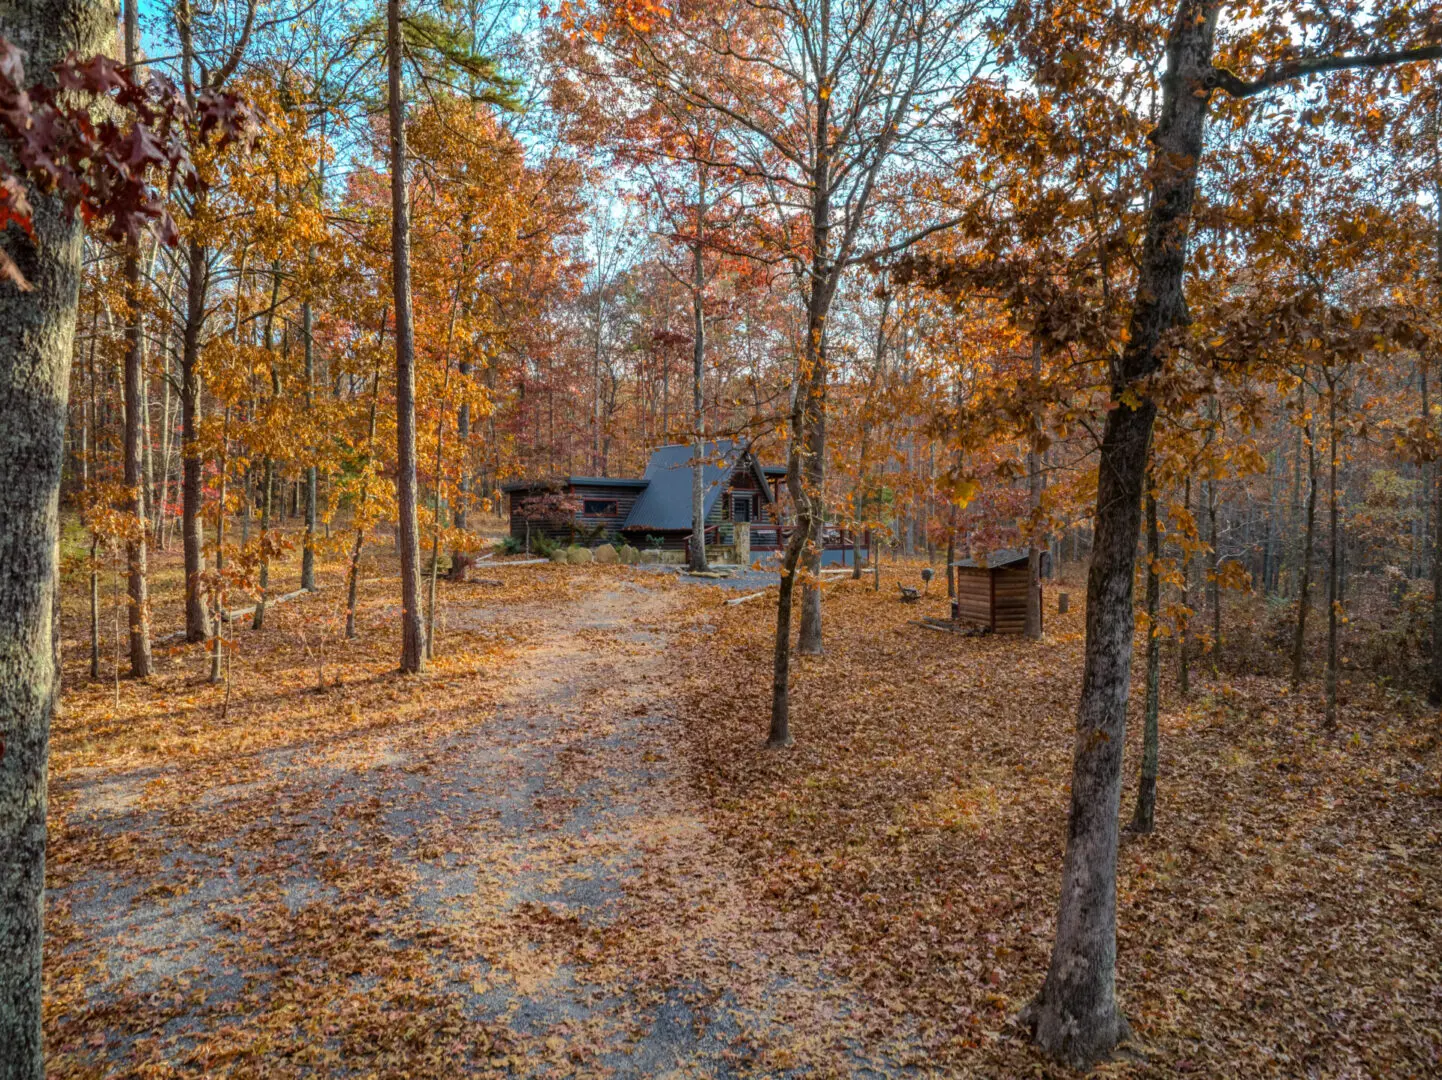 Nestled in the woods, Little River Point offers a cozy cabin retreat surrounded by vibrant fall leaves.